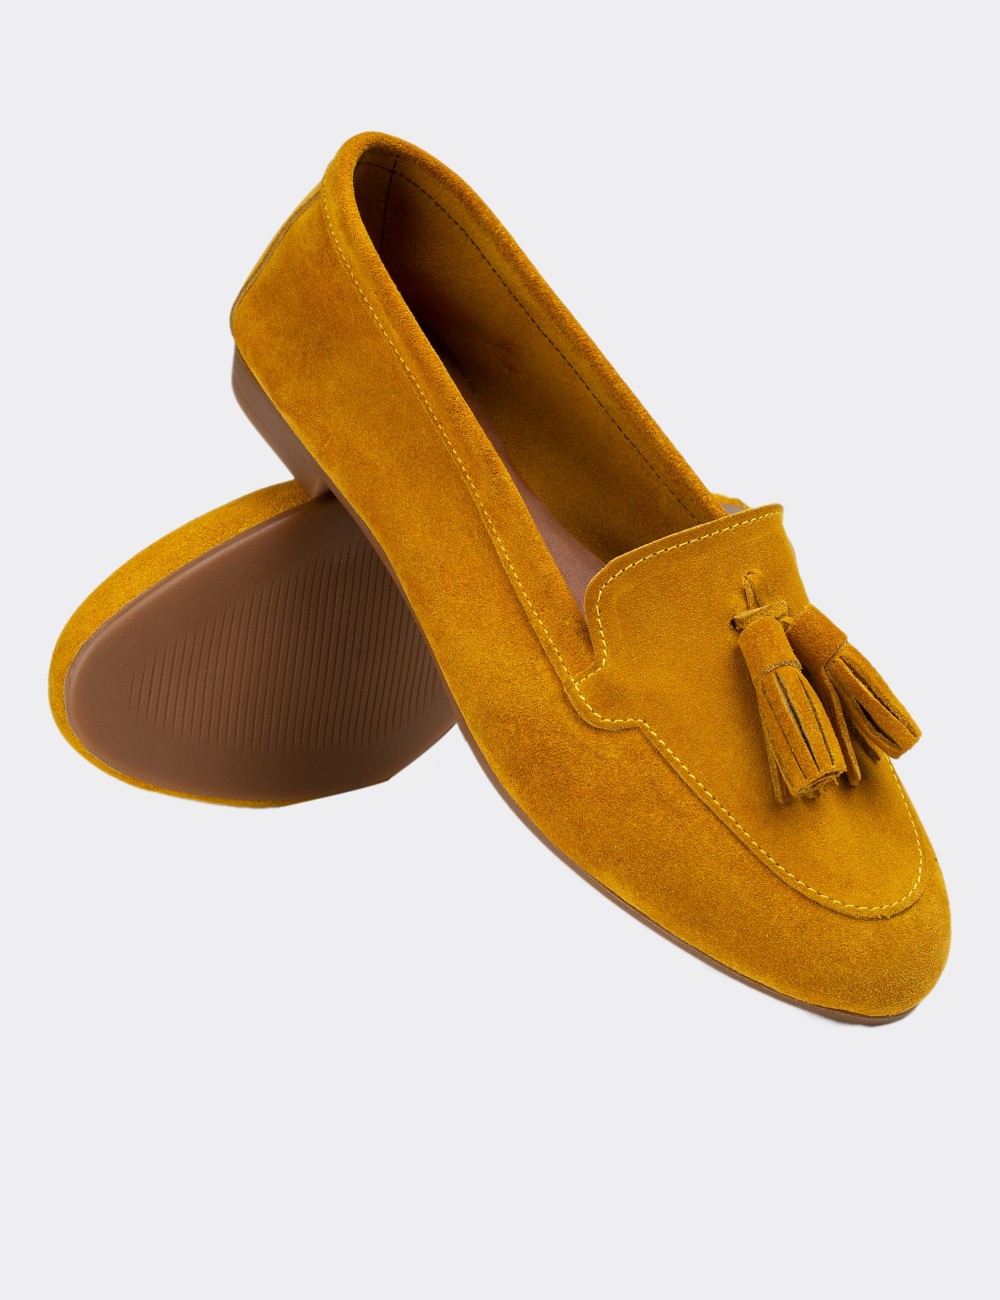 Yellow Suede Leather Loafers - E3209ZSRIC01